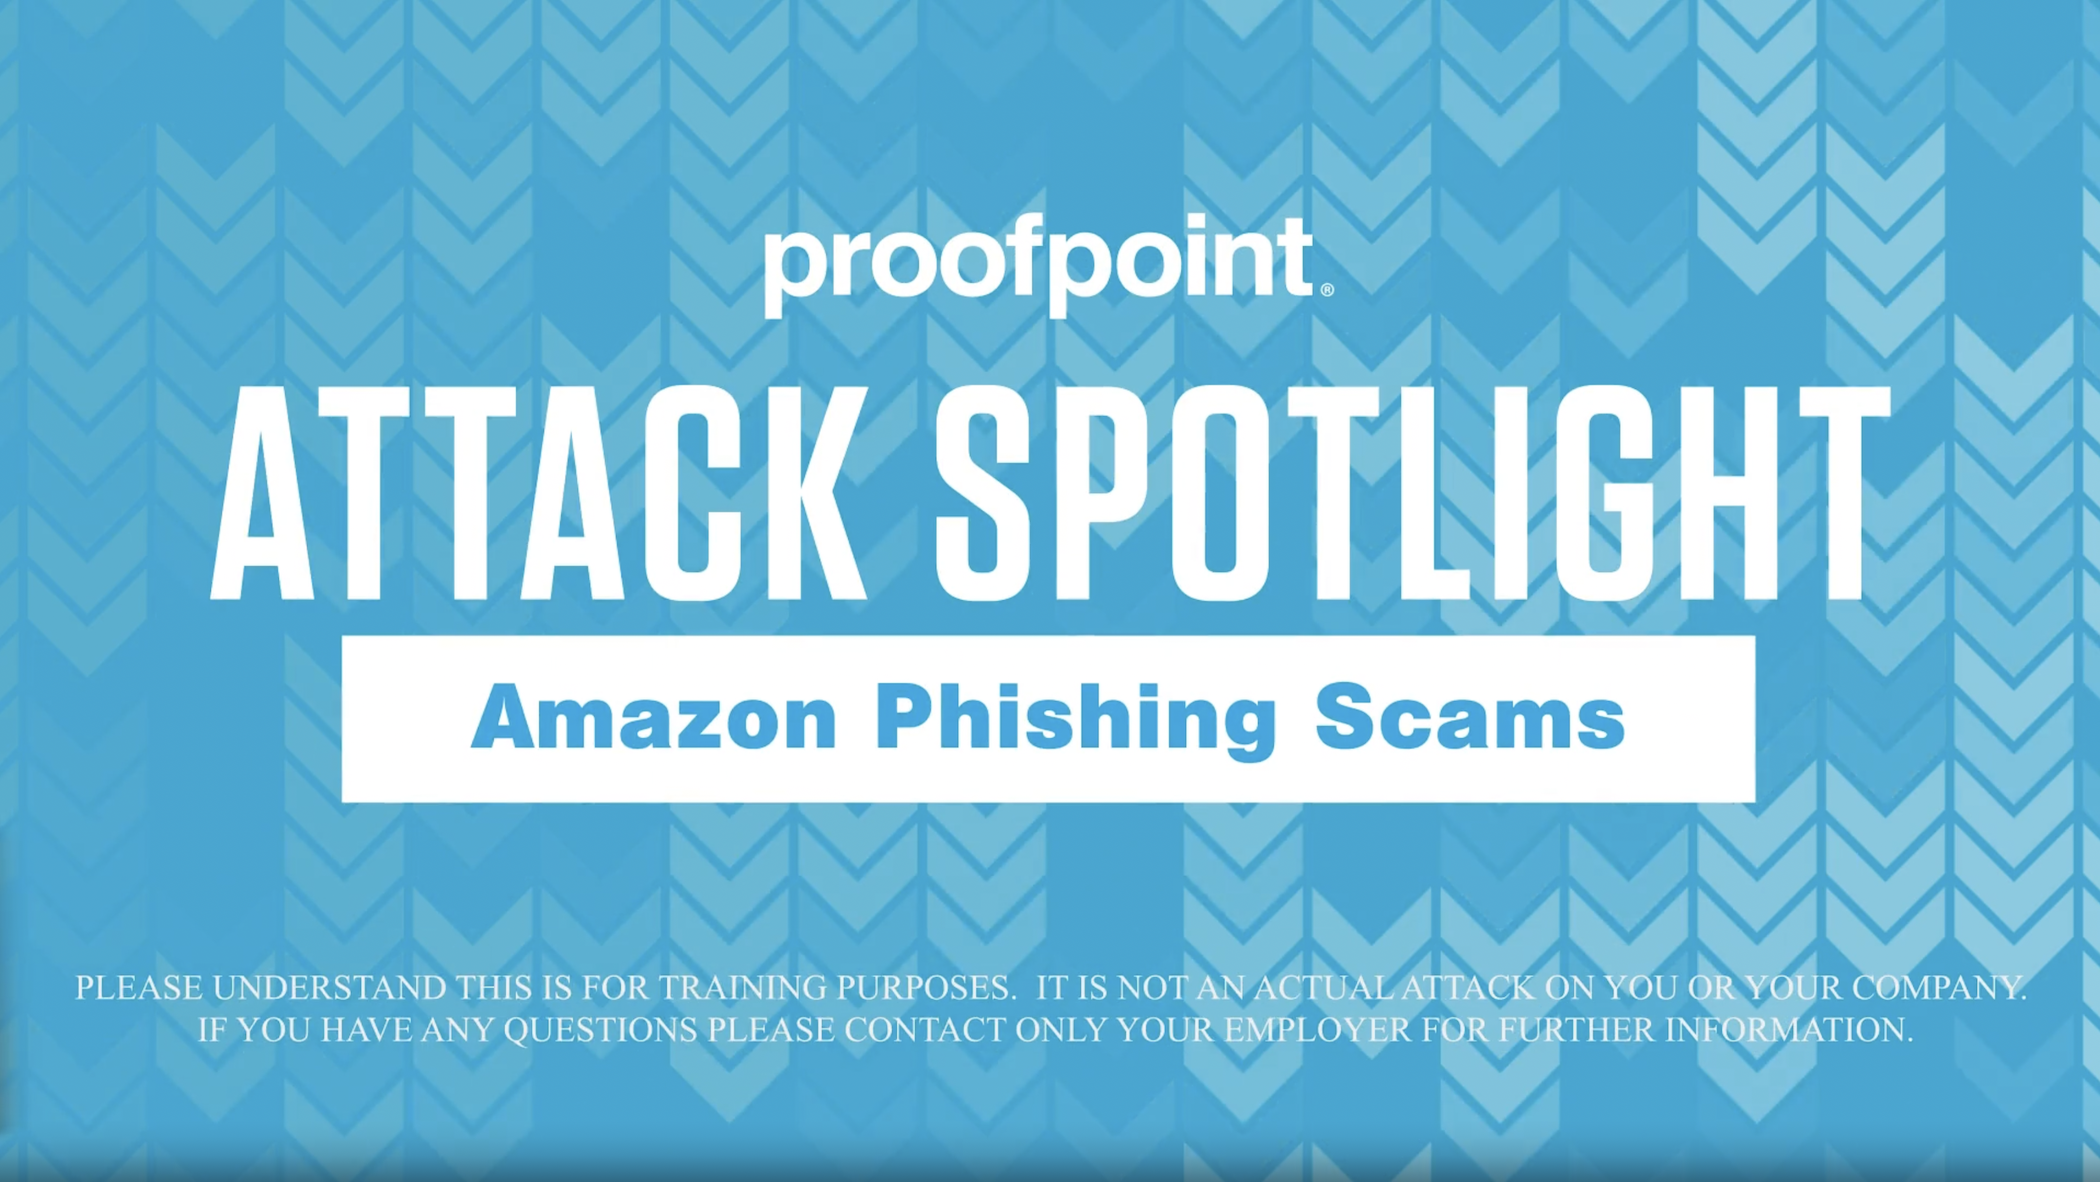 Proofpoint - Amazon Phishing Scams Video Thumbnail-1